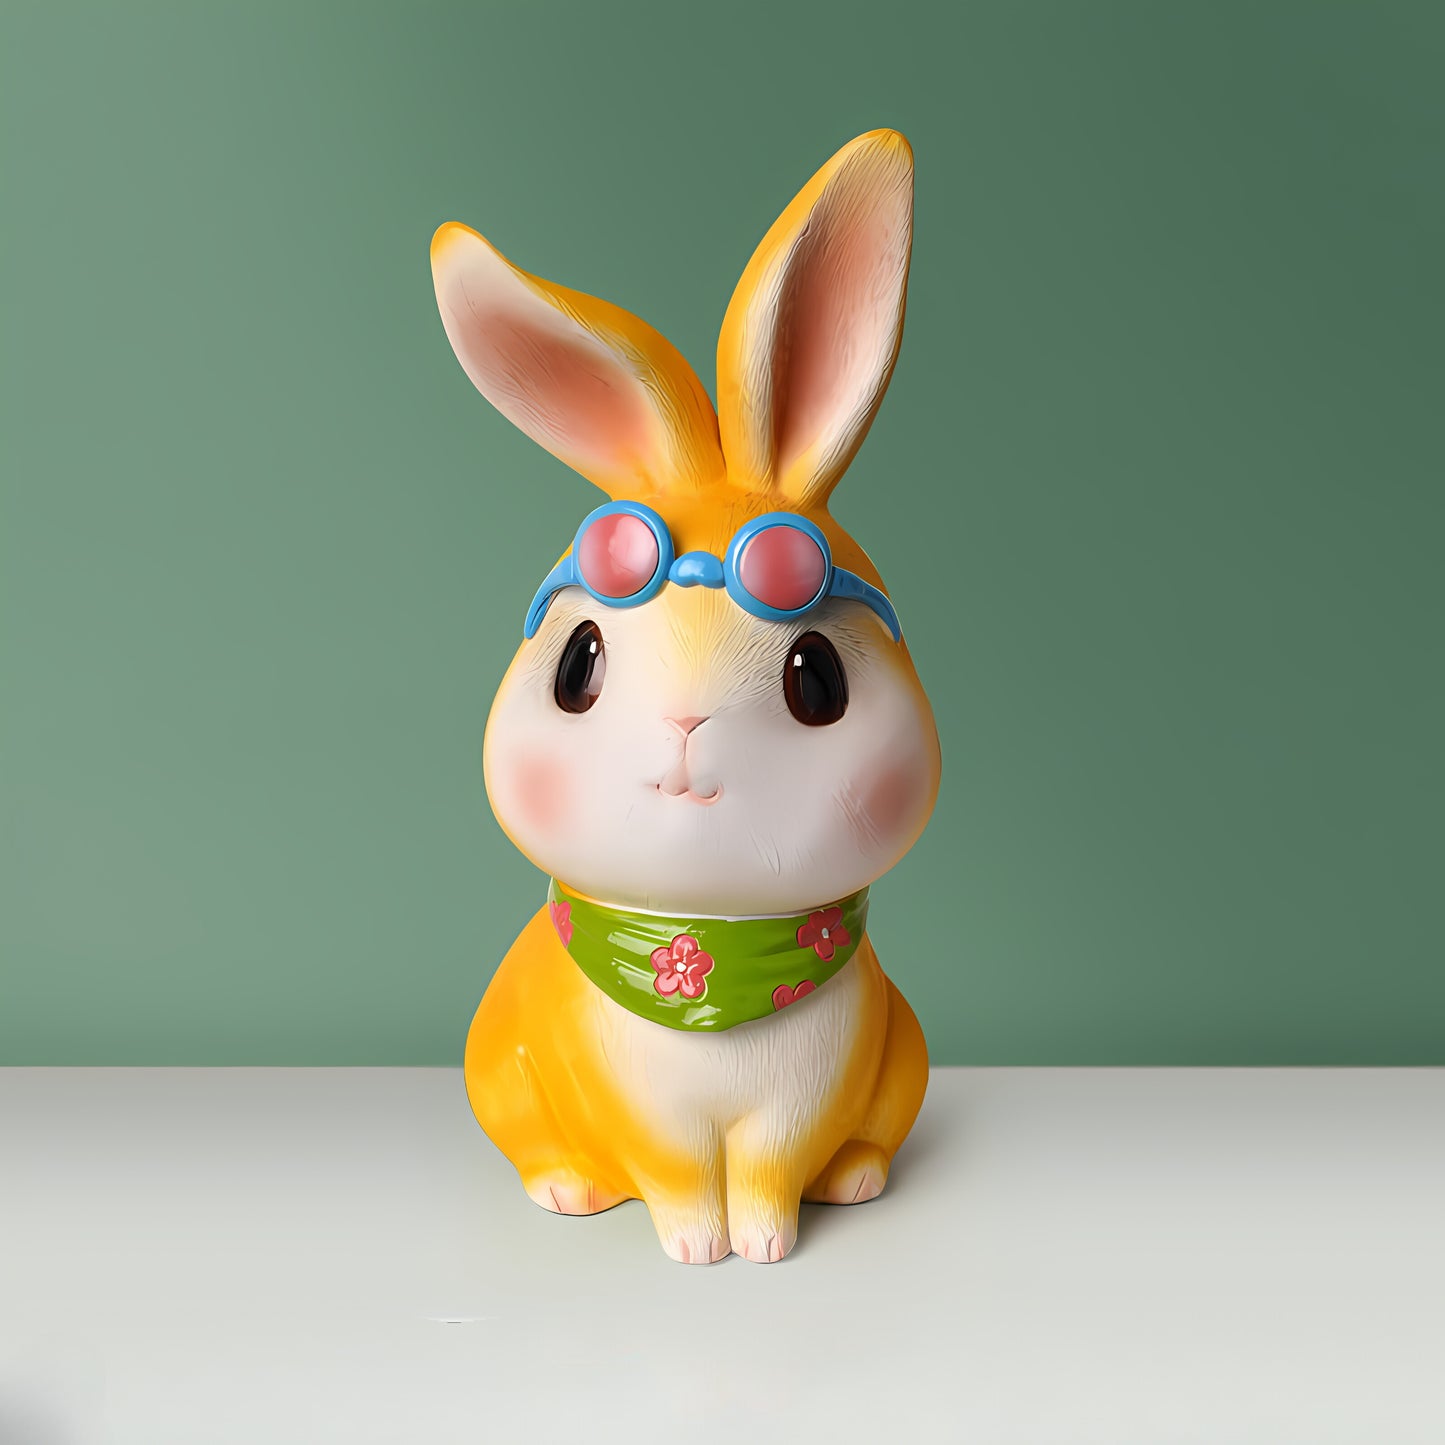 Adorable Bunny Coin Bank - Money In Only, Perfect for Kids' Birthdays, Creative Desktop Decor, 3 Colors, 4.72 x 5.51 x 10.63 Inches